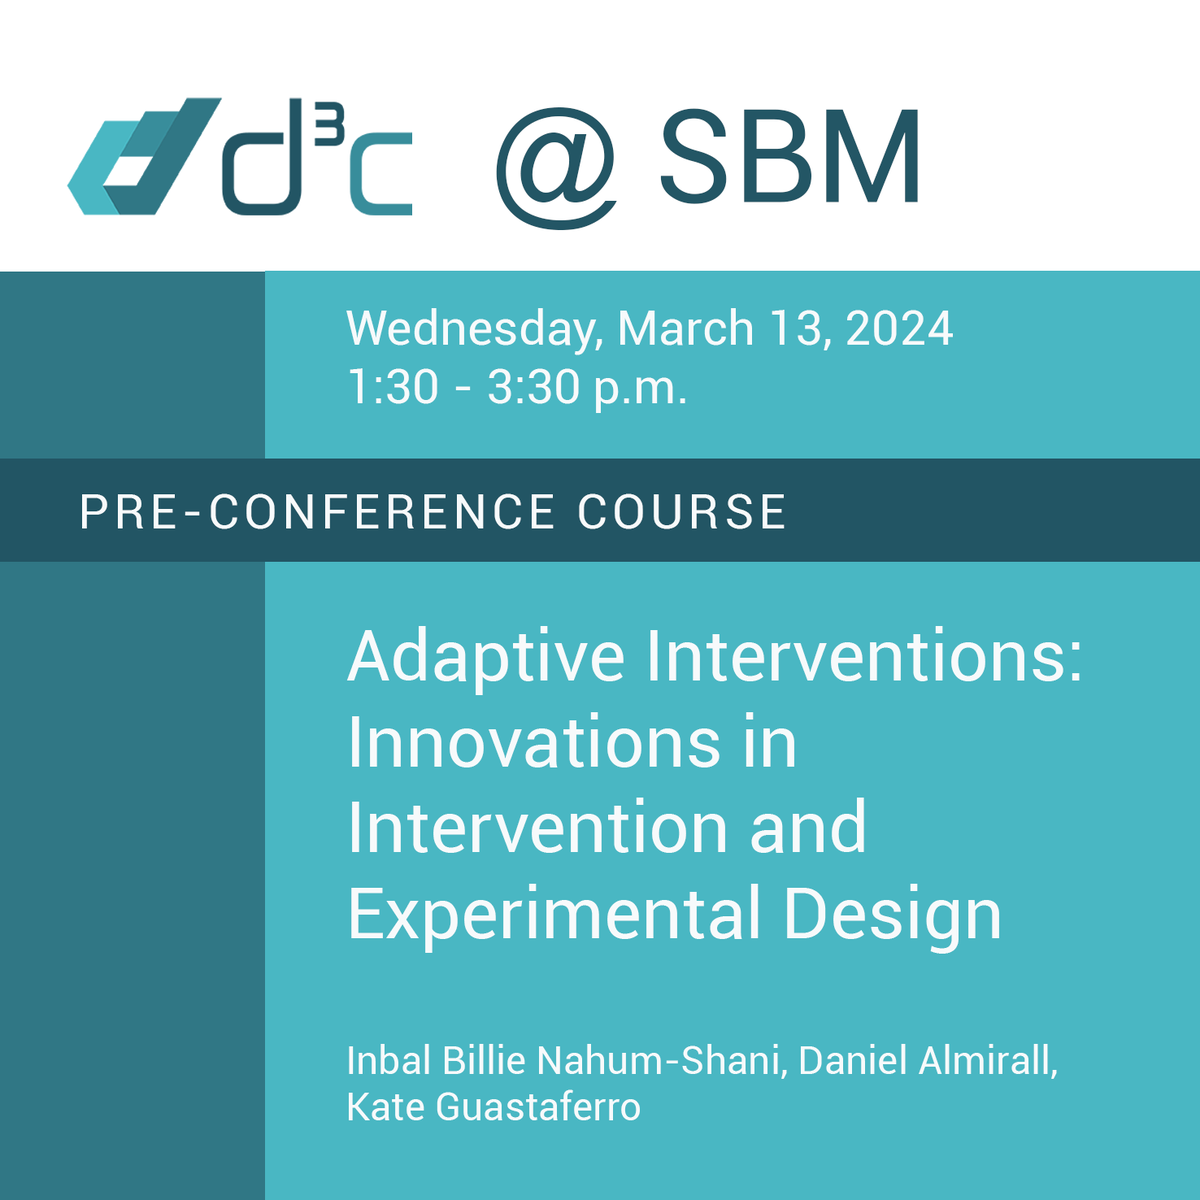 Join us at the Society of Behavioral Medicine in Philadelphia for a pre-conference course on Adaptive Interventions with @almirall_daniel, @kguastaferroPhD, and Billie Nahum-Shani @BehavioralMed